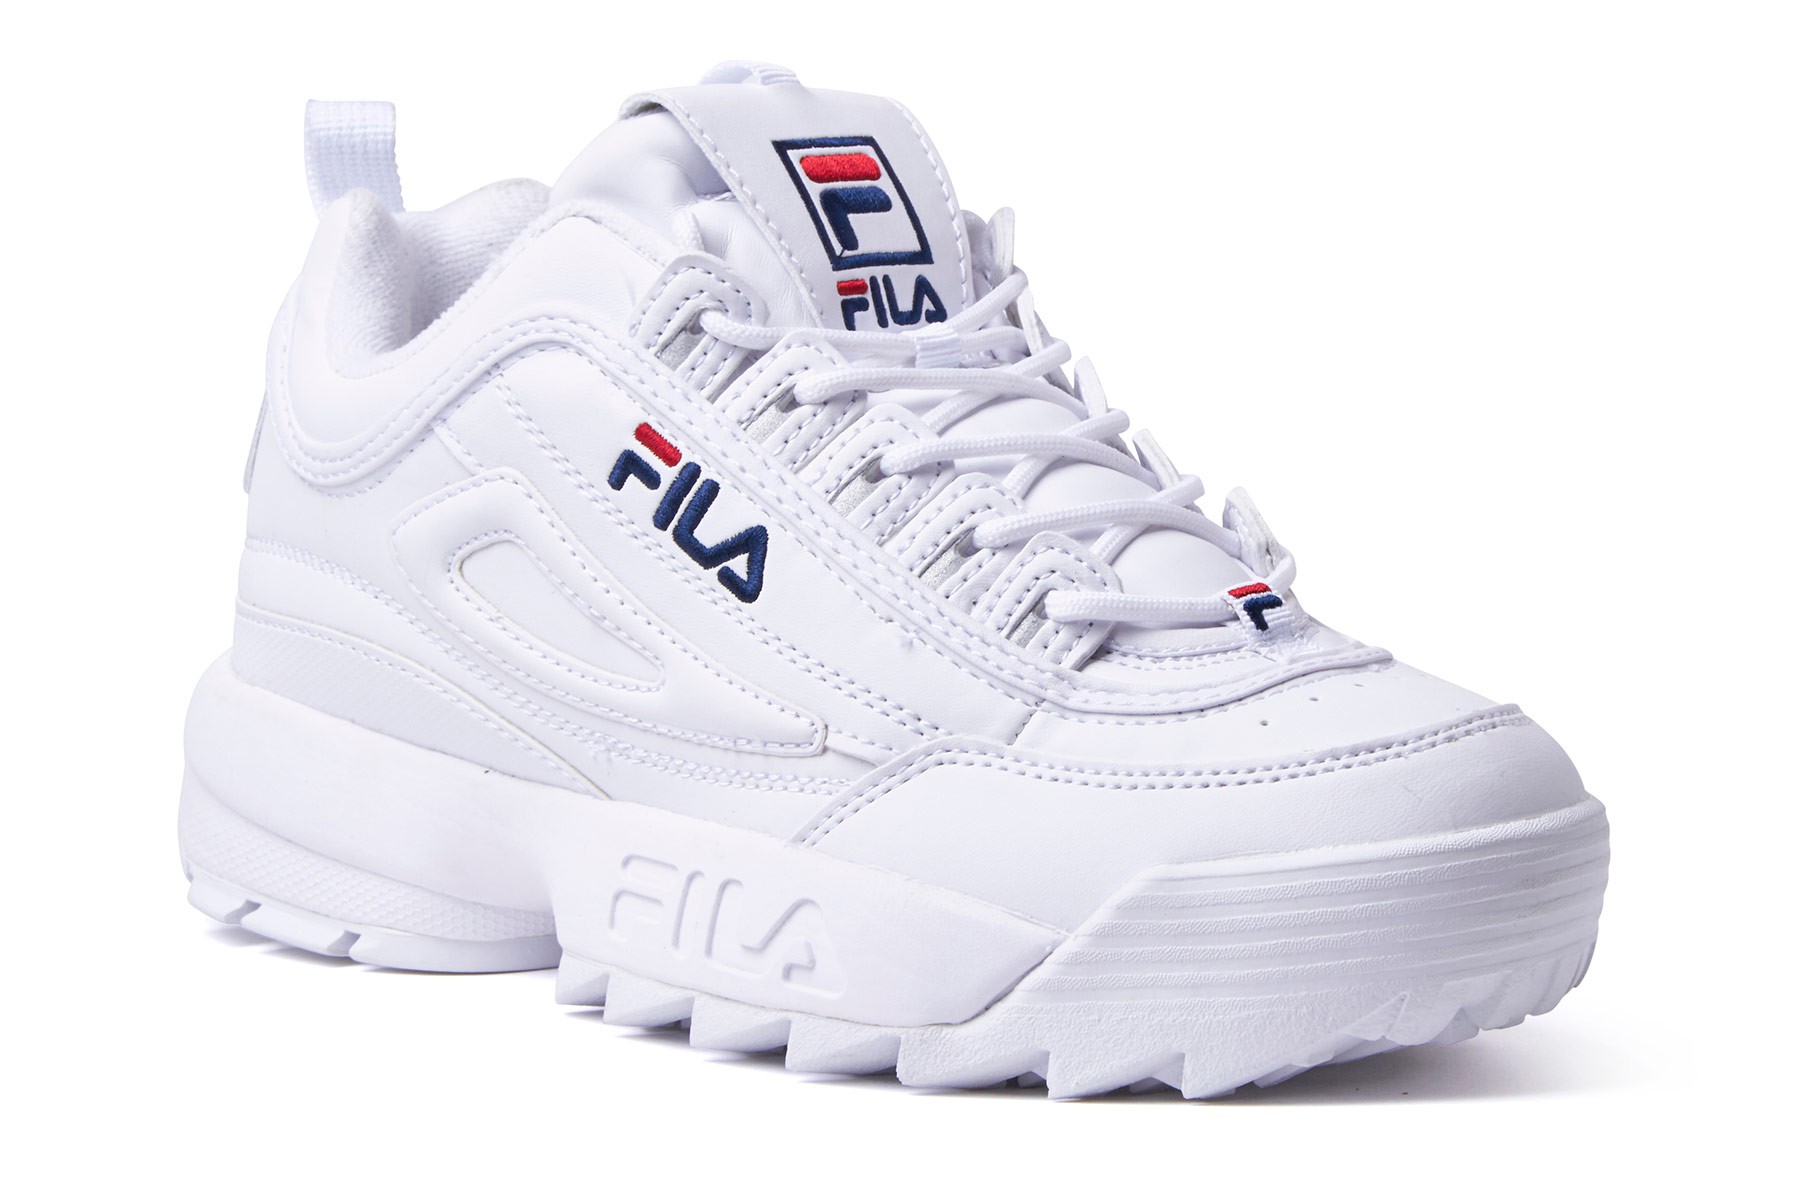 giay the thao ugly sneakers - fila disruptor - elle man